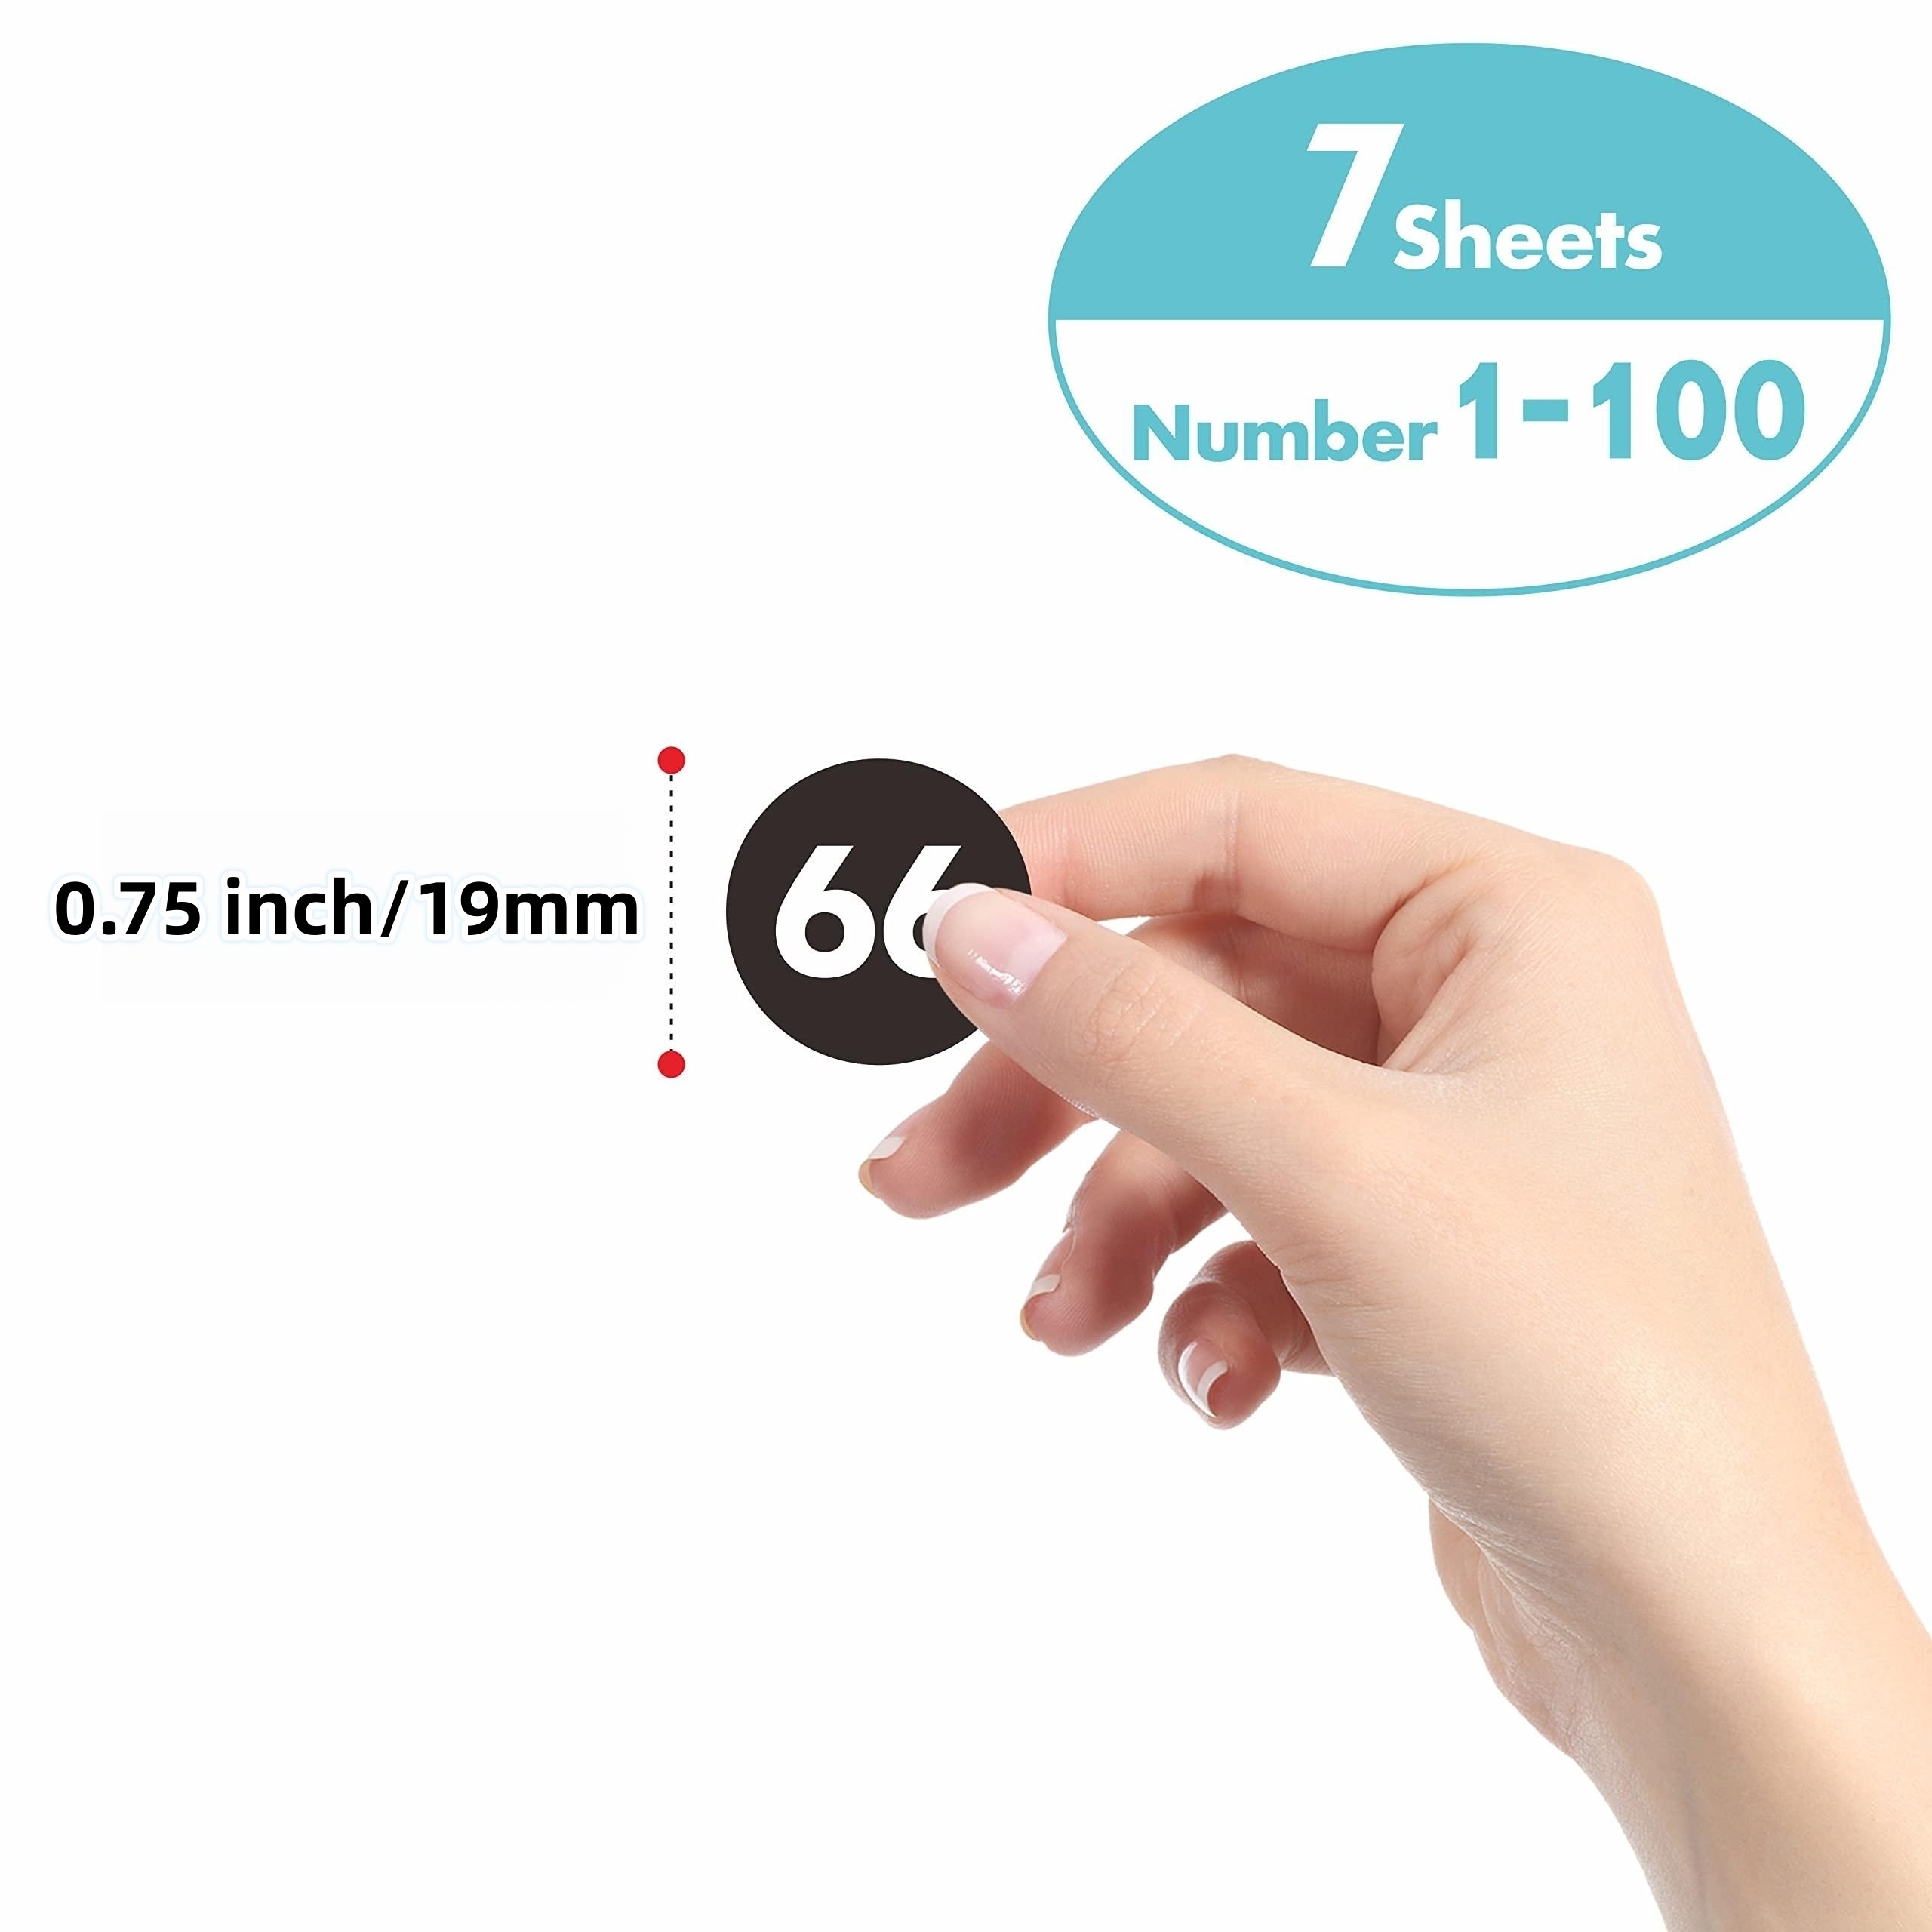 1-100 Vinyl Number Stickers 10mm Small Round Self-Adhesive Inventory Label  black